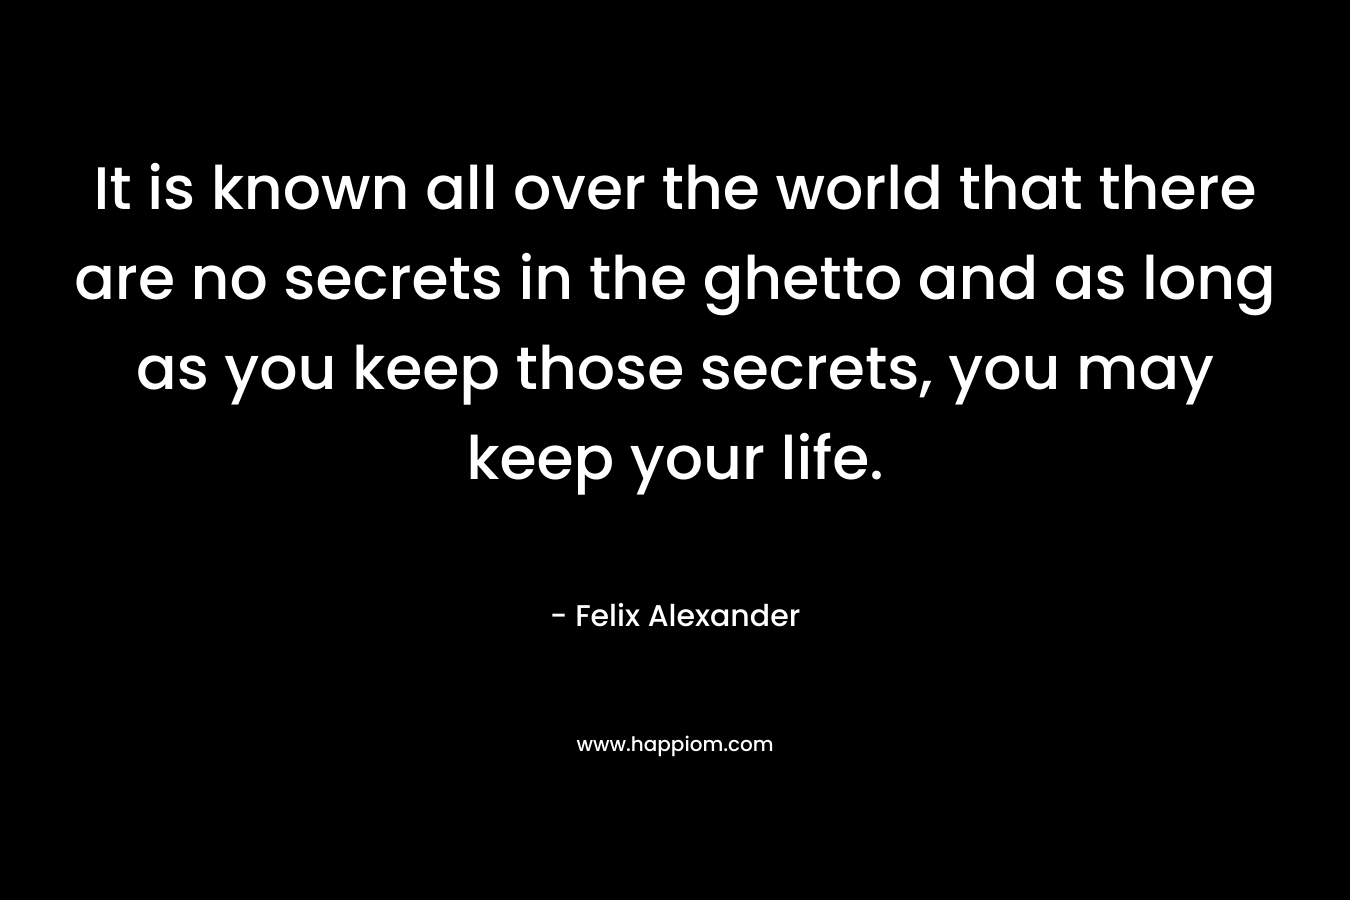 It is known all over the world that there are no secrets in the ghetto and as long as you keep those secrets, you may keep your life.